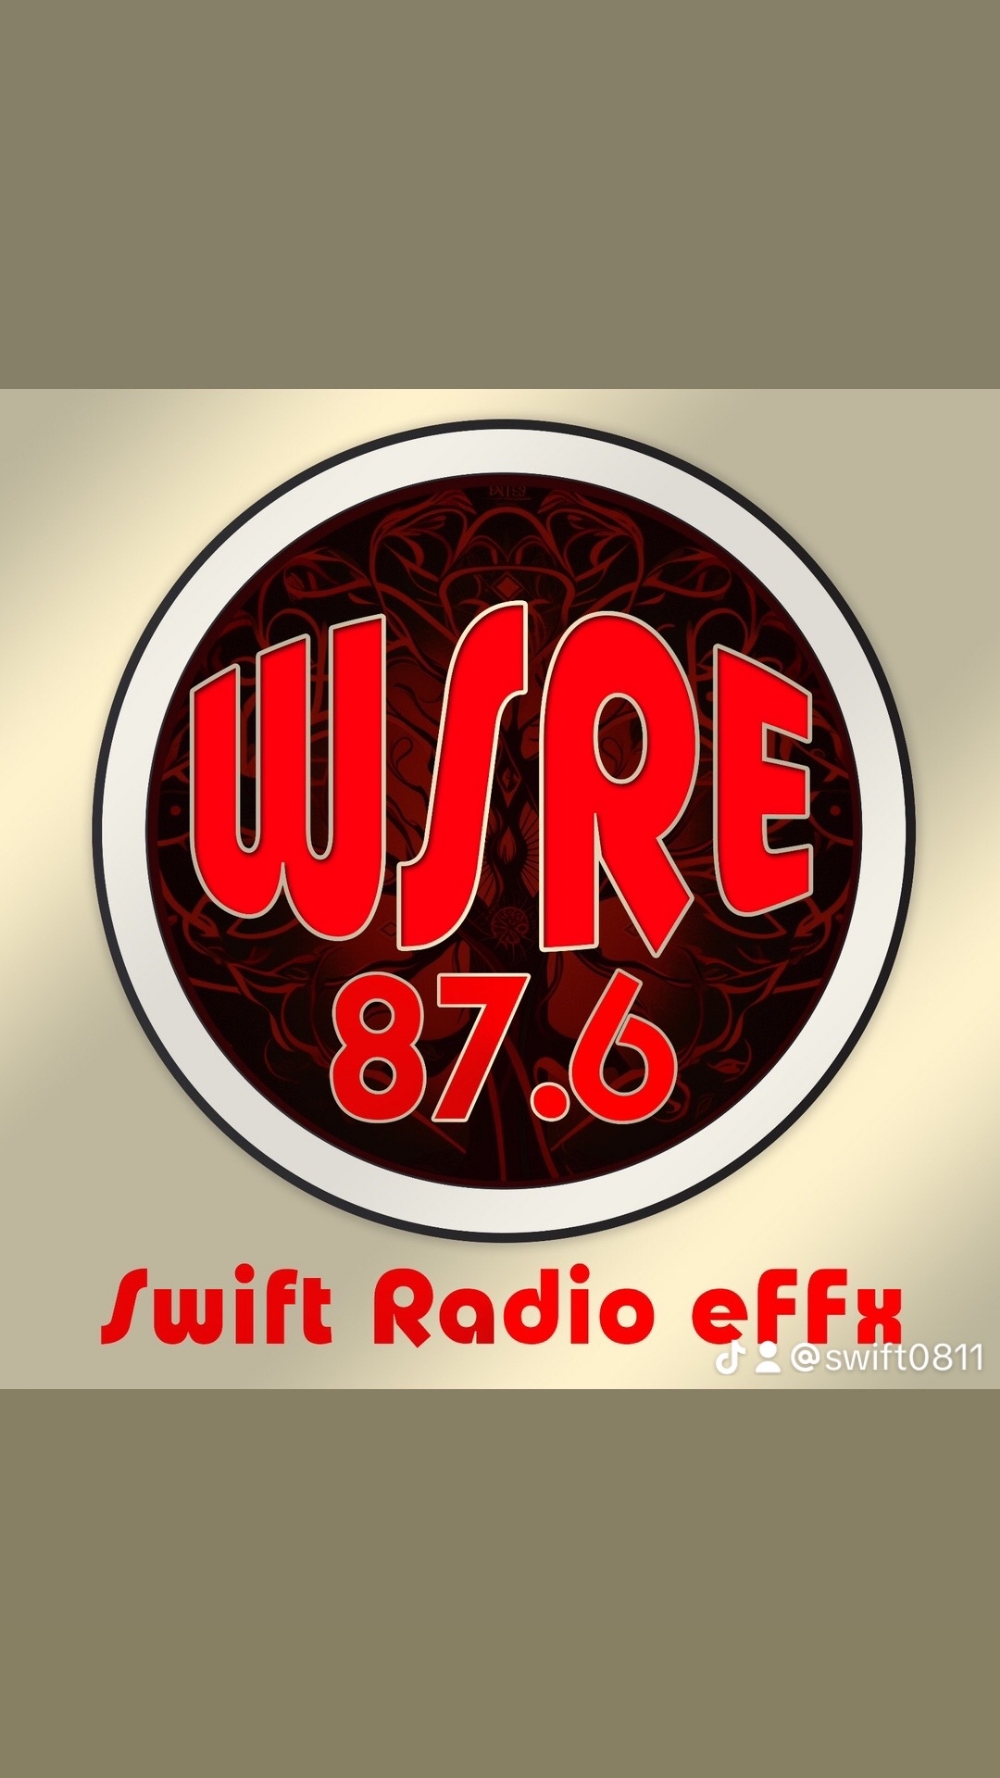 Tap'N Right Now To WSRE 87.6 Swift Radio eFFx For Throwback Thursdays! @wsreradio.com